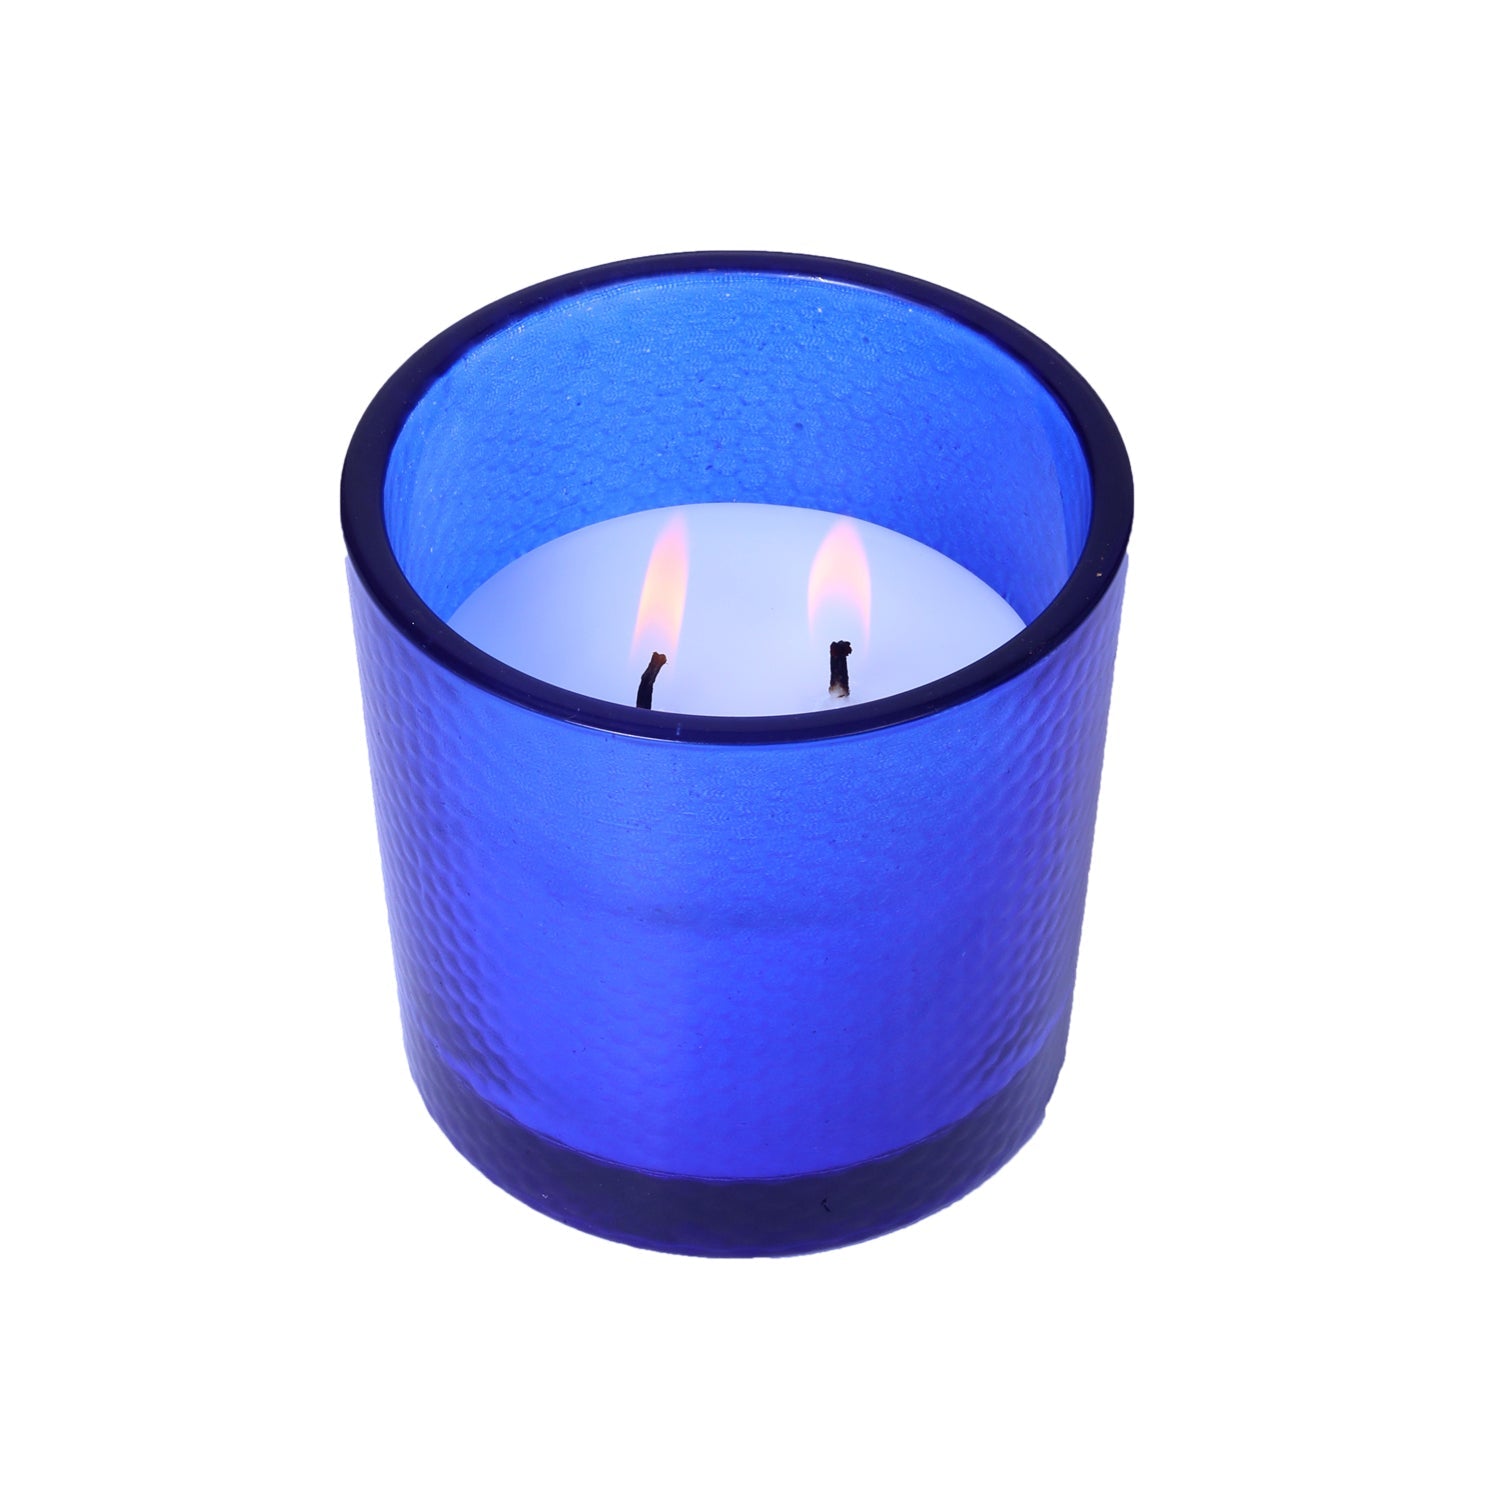 Hosley 2 Wick Unscented Glass Candle for Decoration for Home, Wedding, Birthday, Pack of 1, Blue